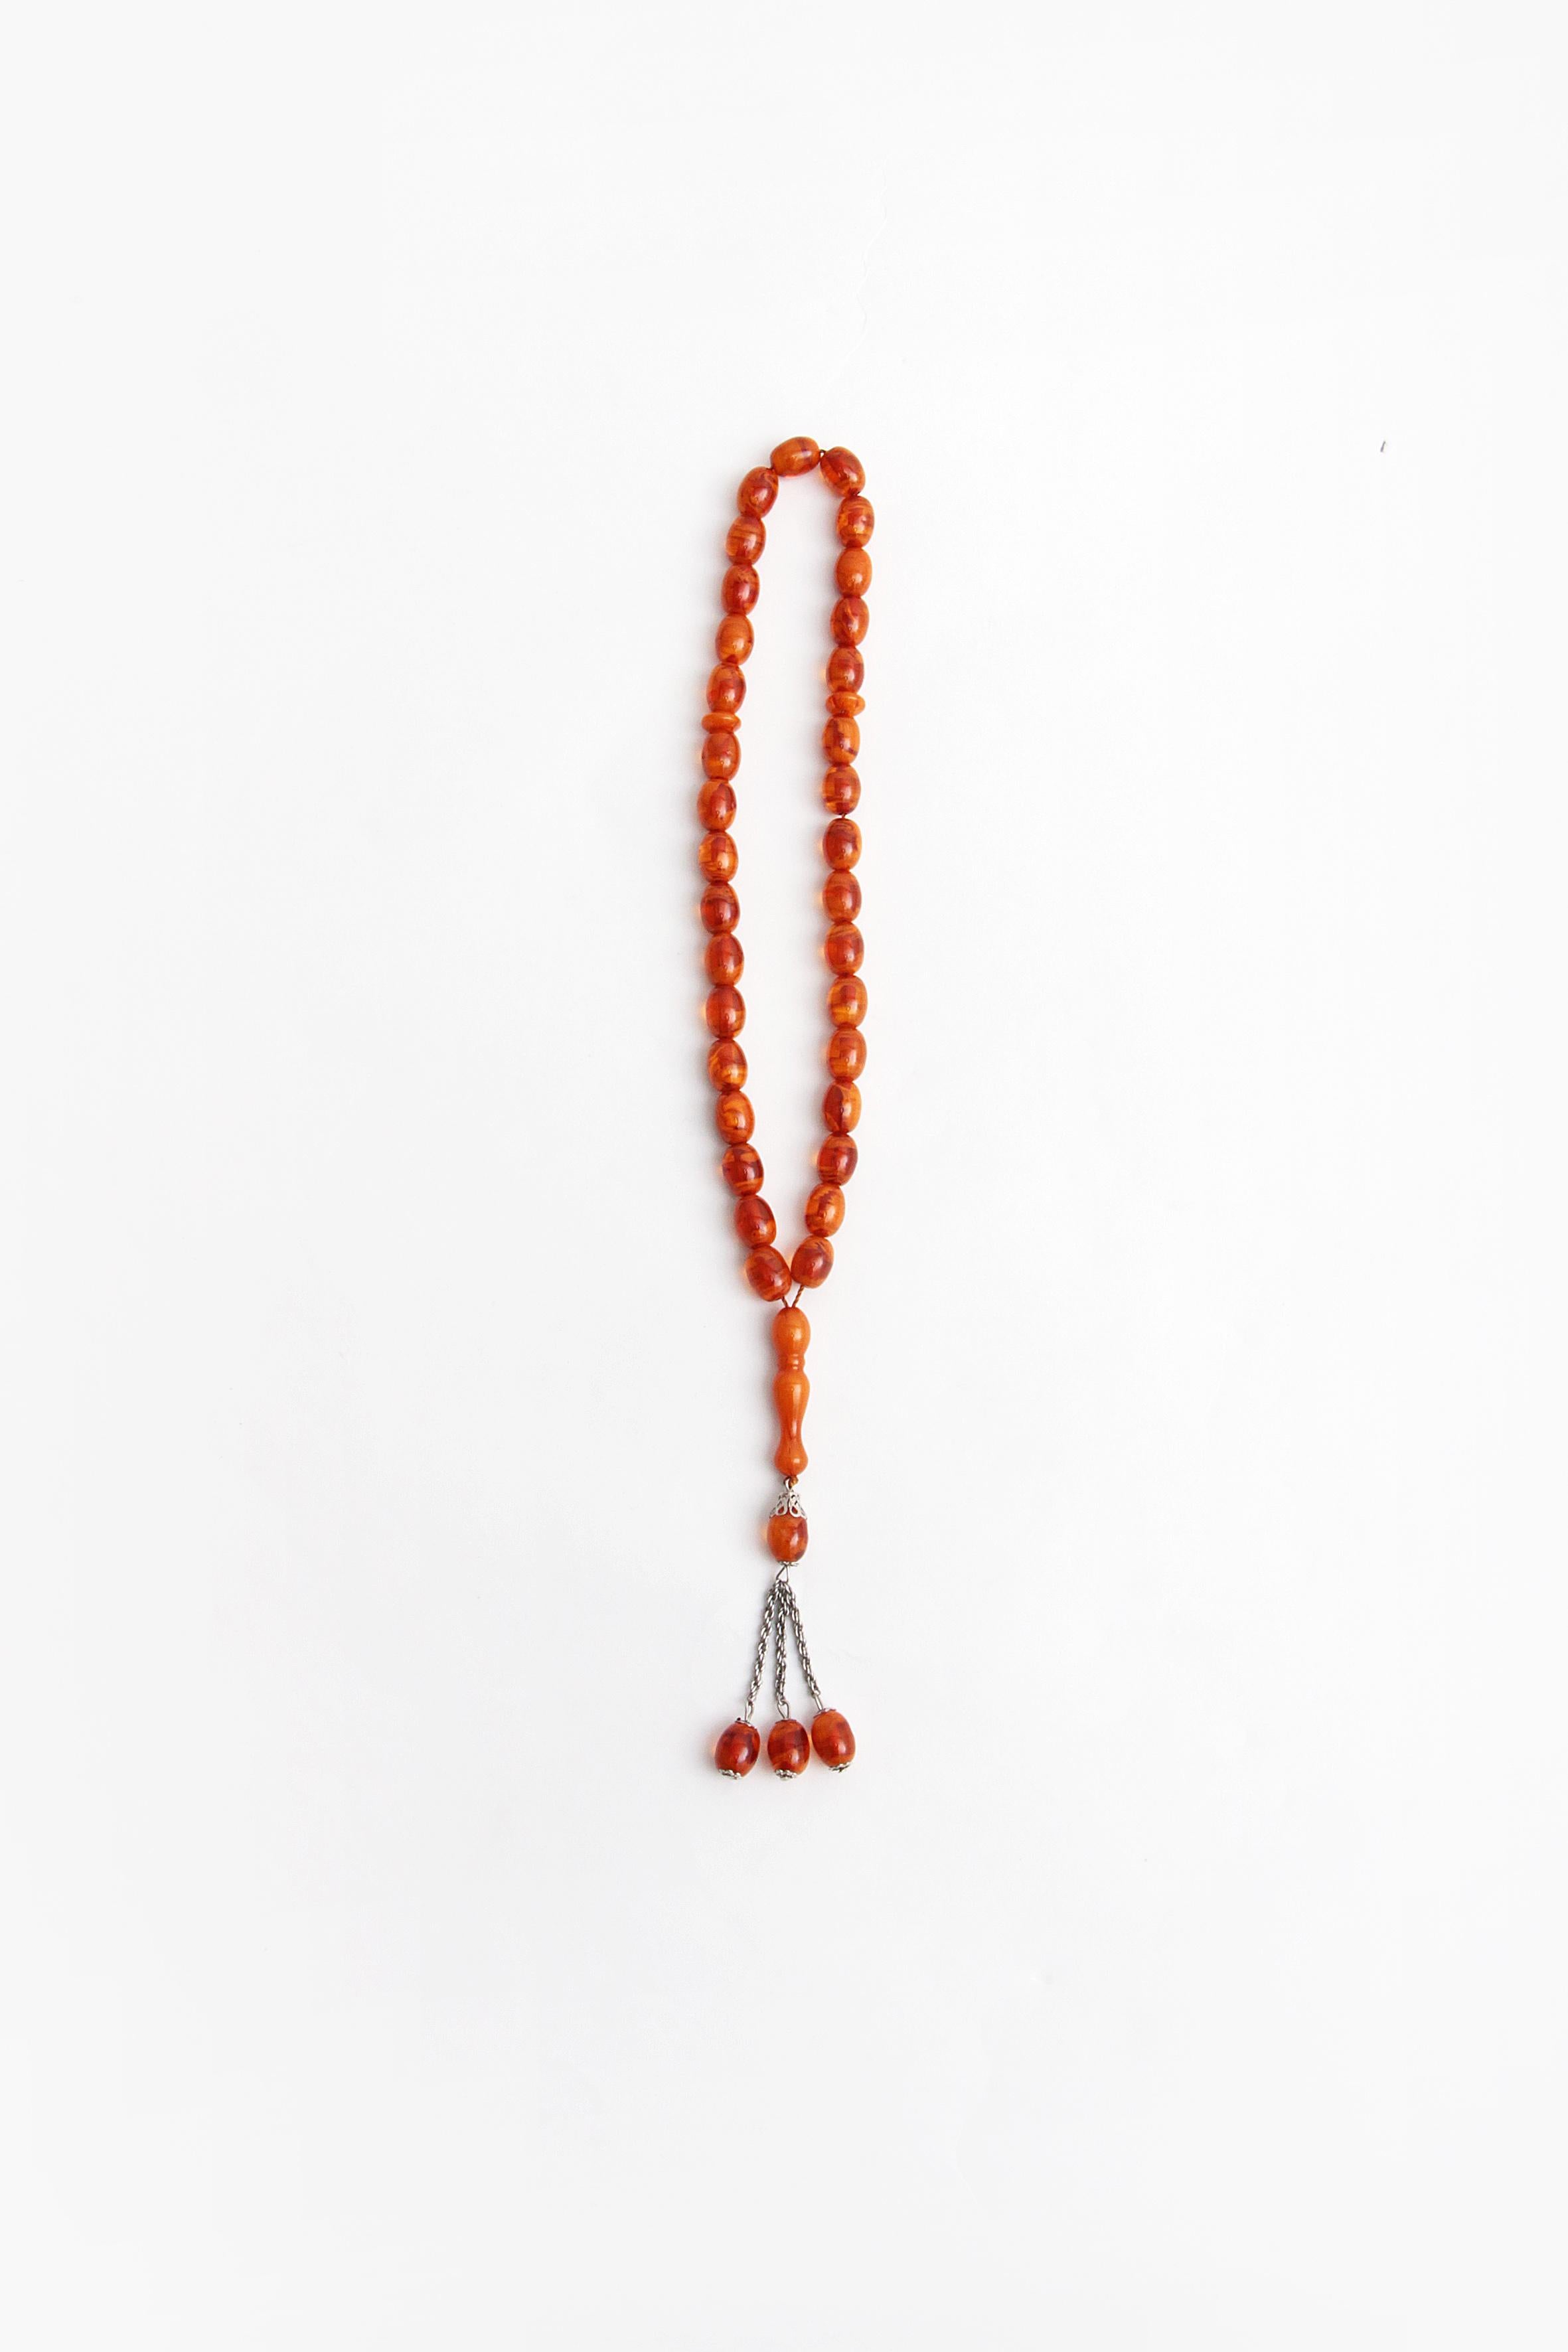 This is a beautiful amber prayer necklace nicely strung with metal details.

This is an amber necklace which is strung with regular beautiful orange red beads.

The necklace has acquired a beautiful patina over the years.

Length 33 cm, 36